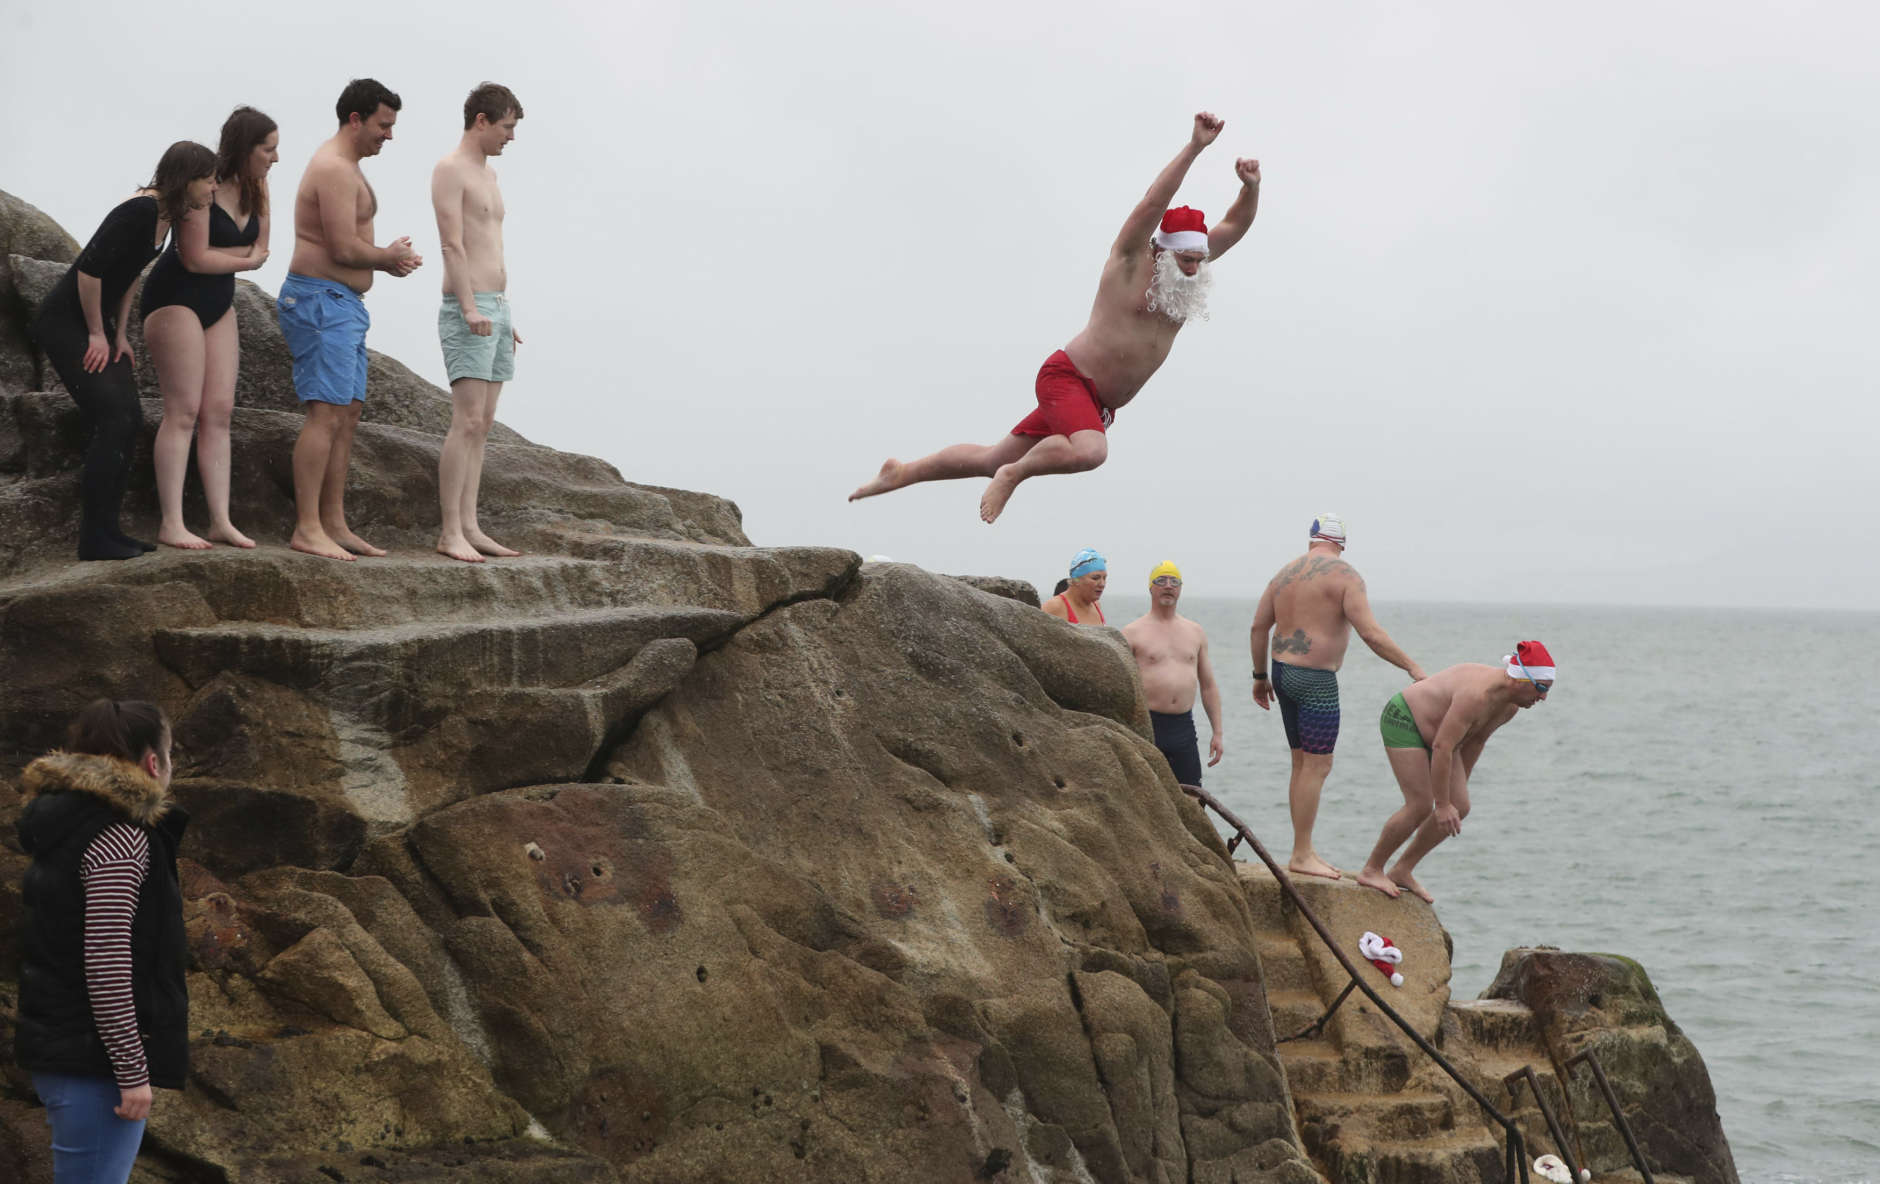 Patrick Corkery, centre, from Castleknock takes part in the annual Christmas Day swim in the Forty Foot, Dun Laoghaire, near Dublin, Ireland, Monday Dec. 25, 2017. (Niall Carson /PA via AP)